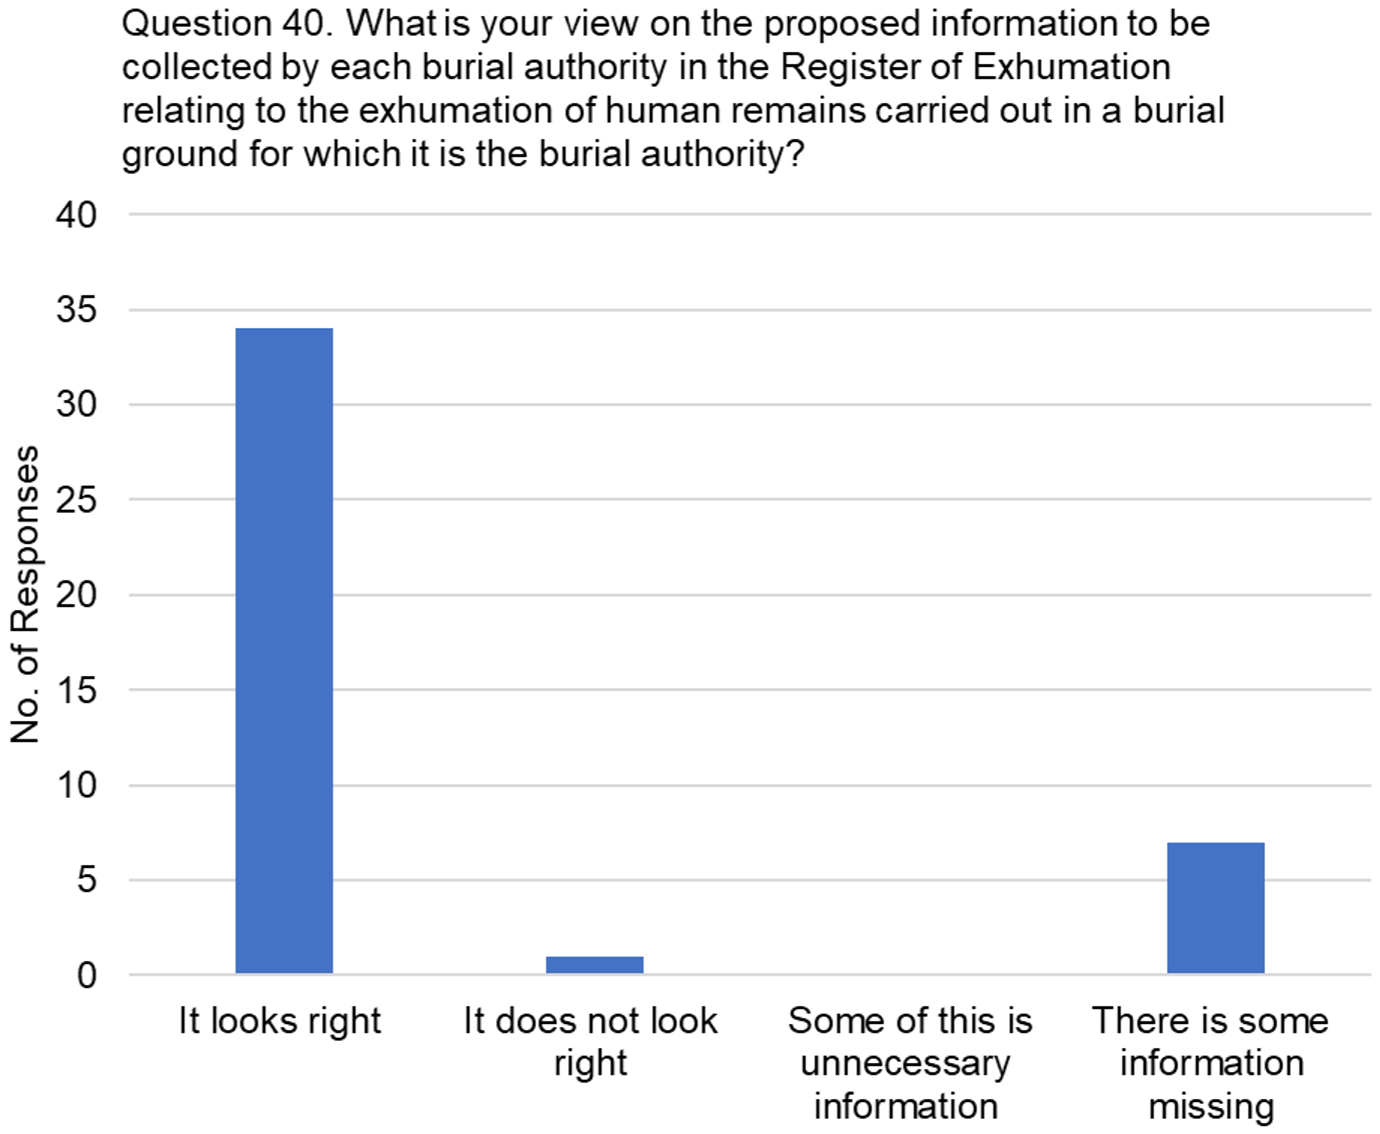 The graph visually presents the data from table 27, focussing on the responses to the question, "What is your view on the proposed information to be collected by each burial authority in the Register of Exhumation relating to the exhumation of human remains carried out in a burial ground for which it is the burial authority?"